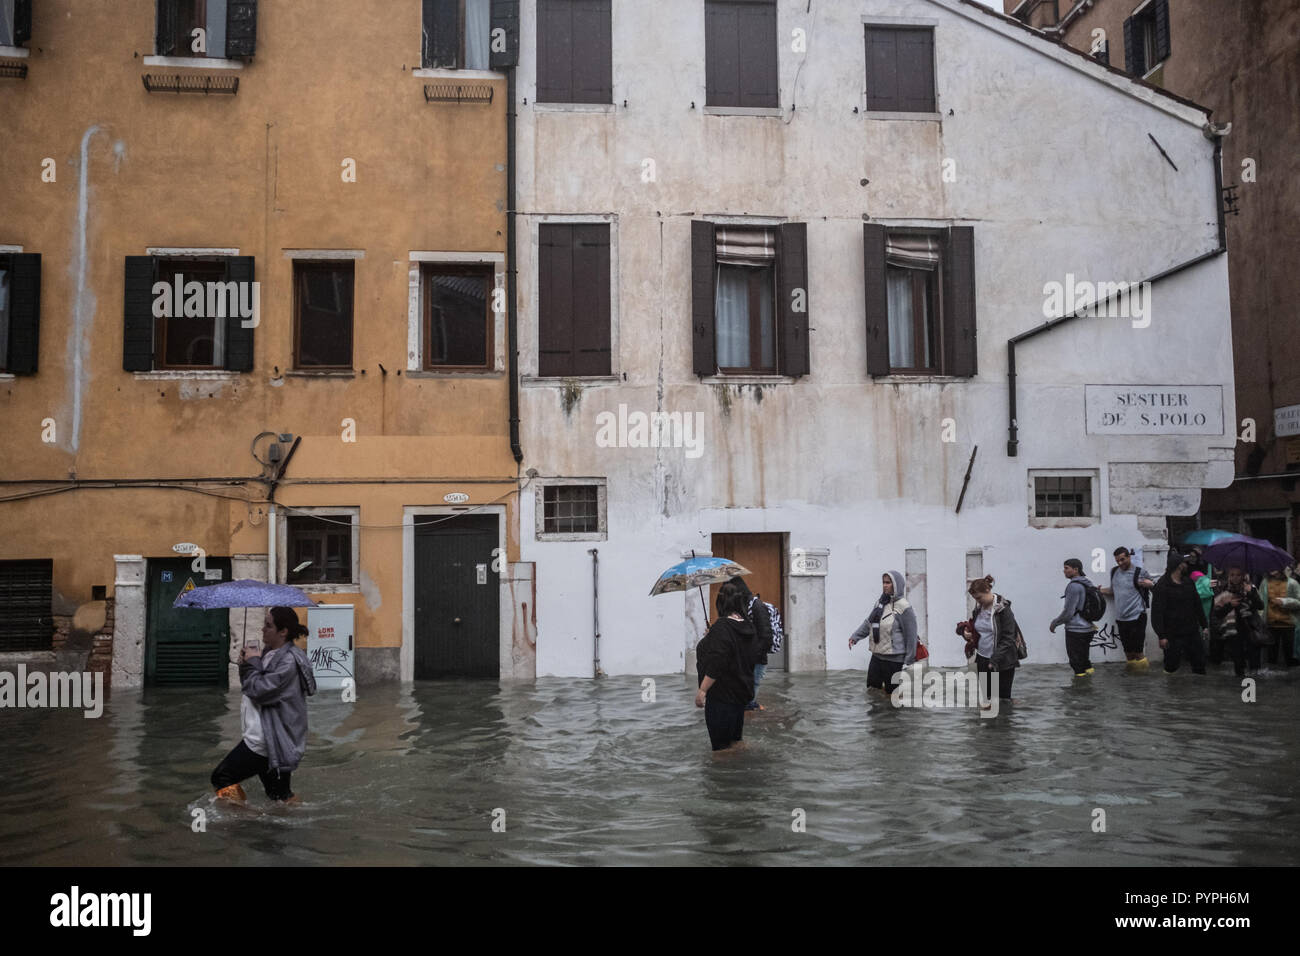 Exceptional Acqua Alta - High Tide Floods in Venice, Italy on 29 October 2018 Stock Photo